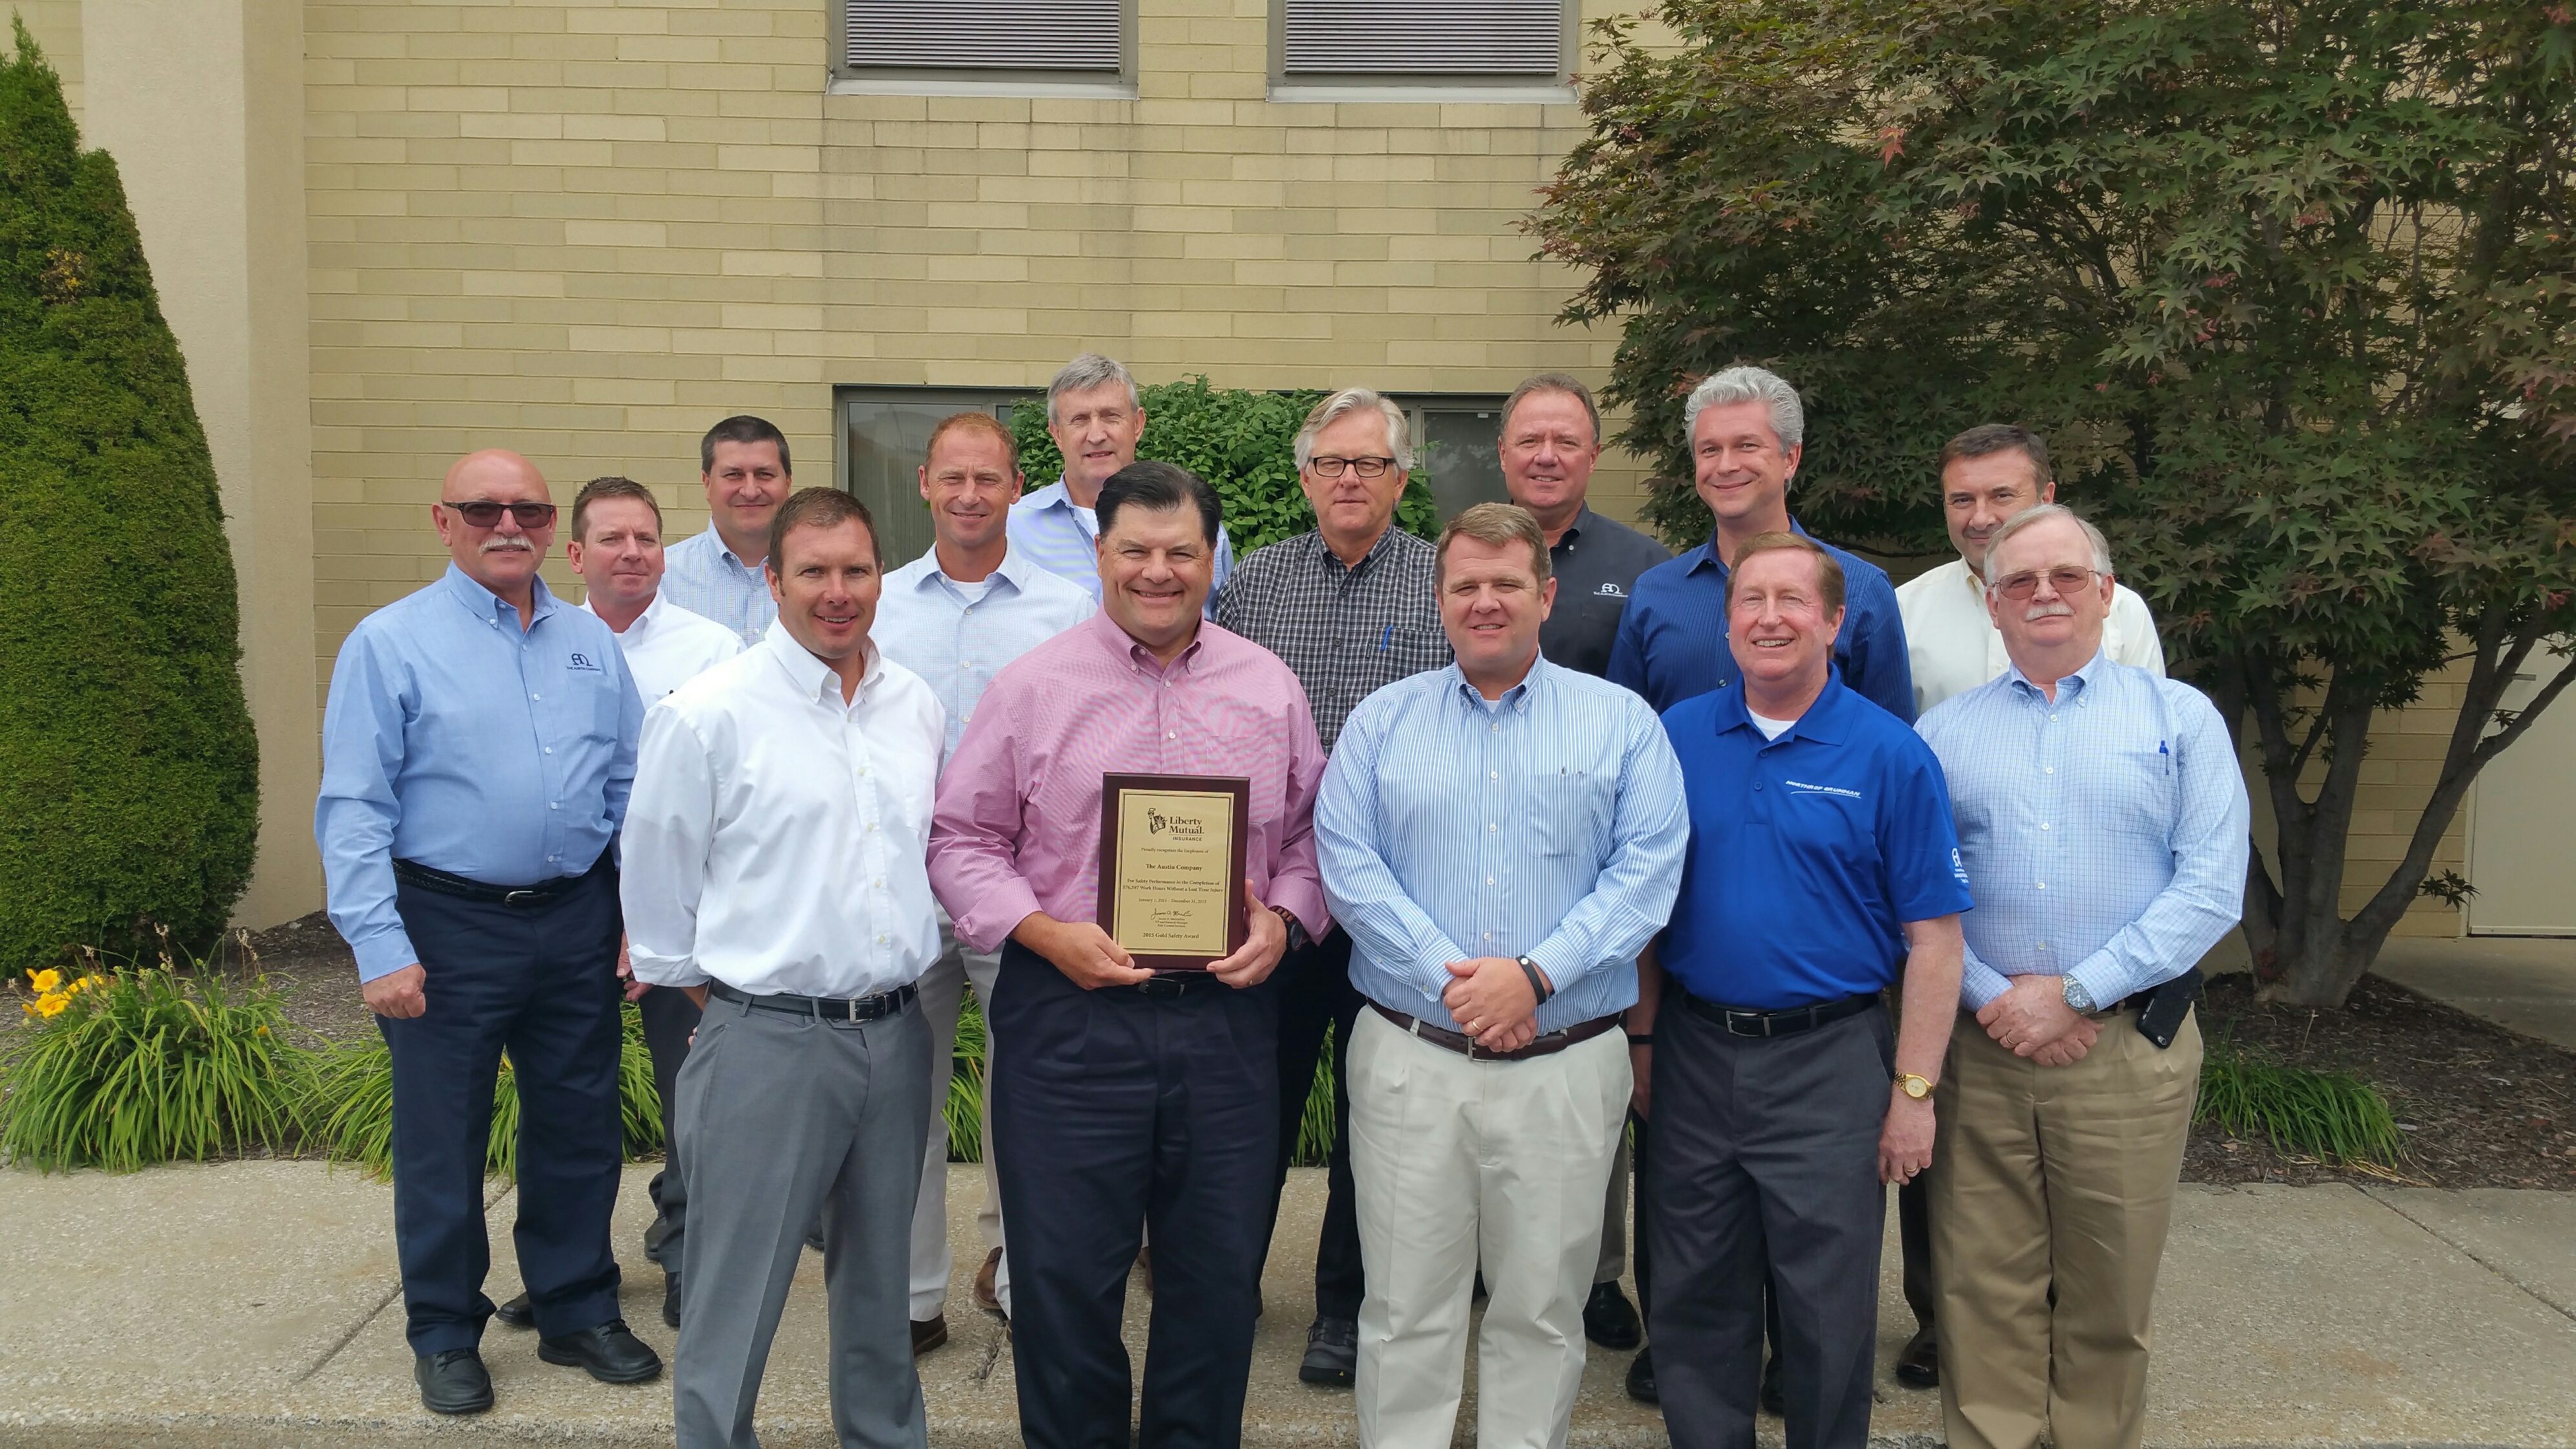 The Austin Company leadership gathered for photo in recognition of receiving safety award